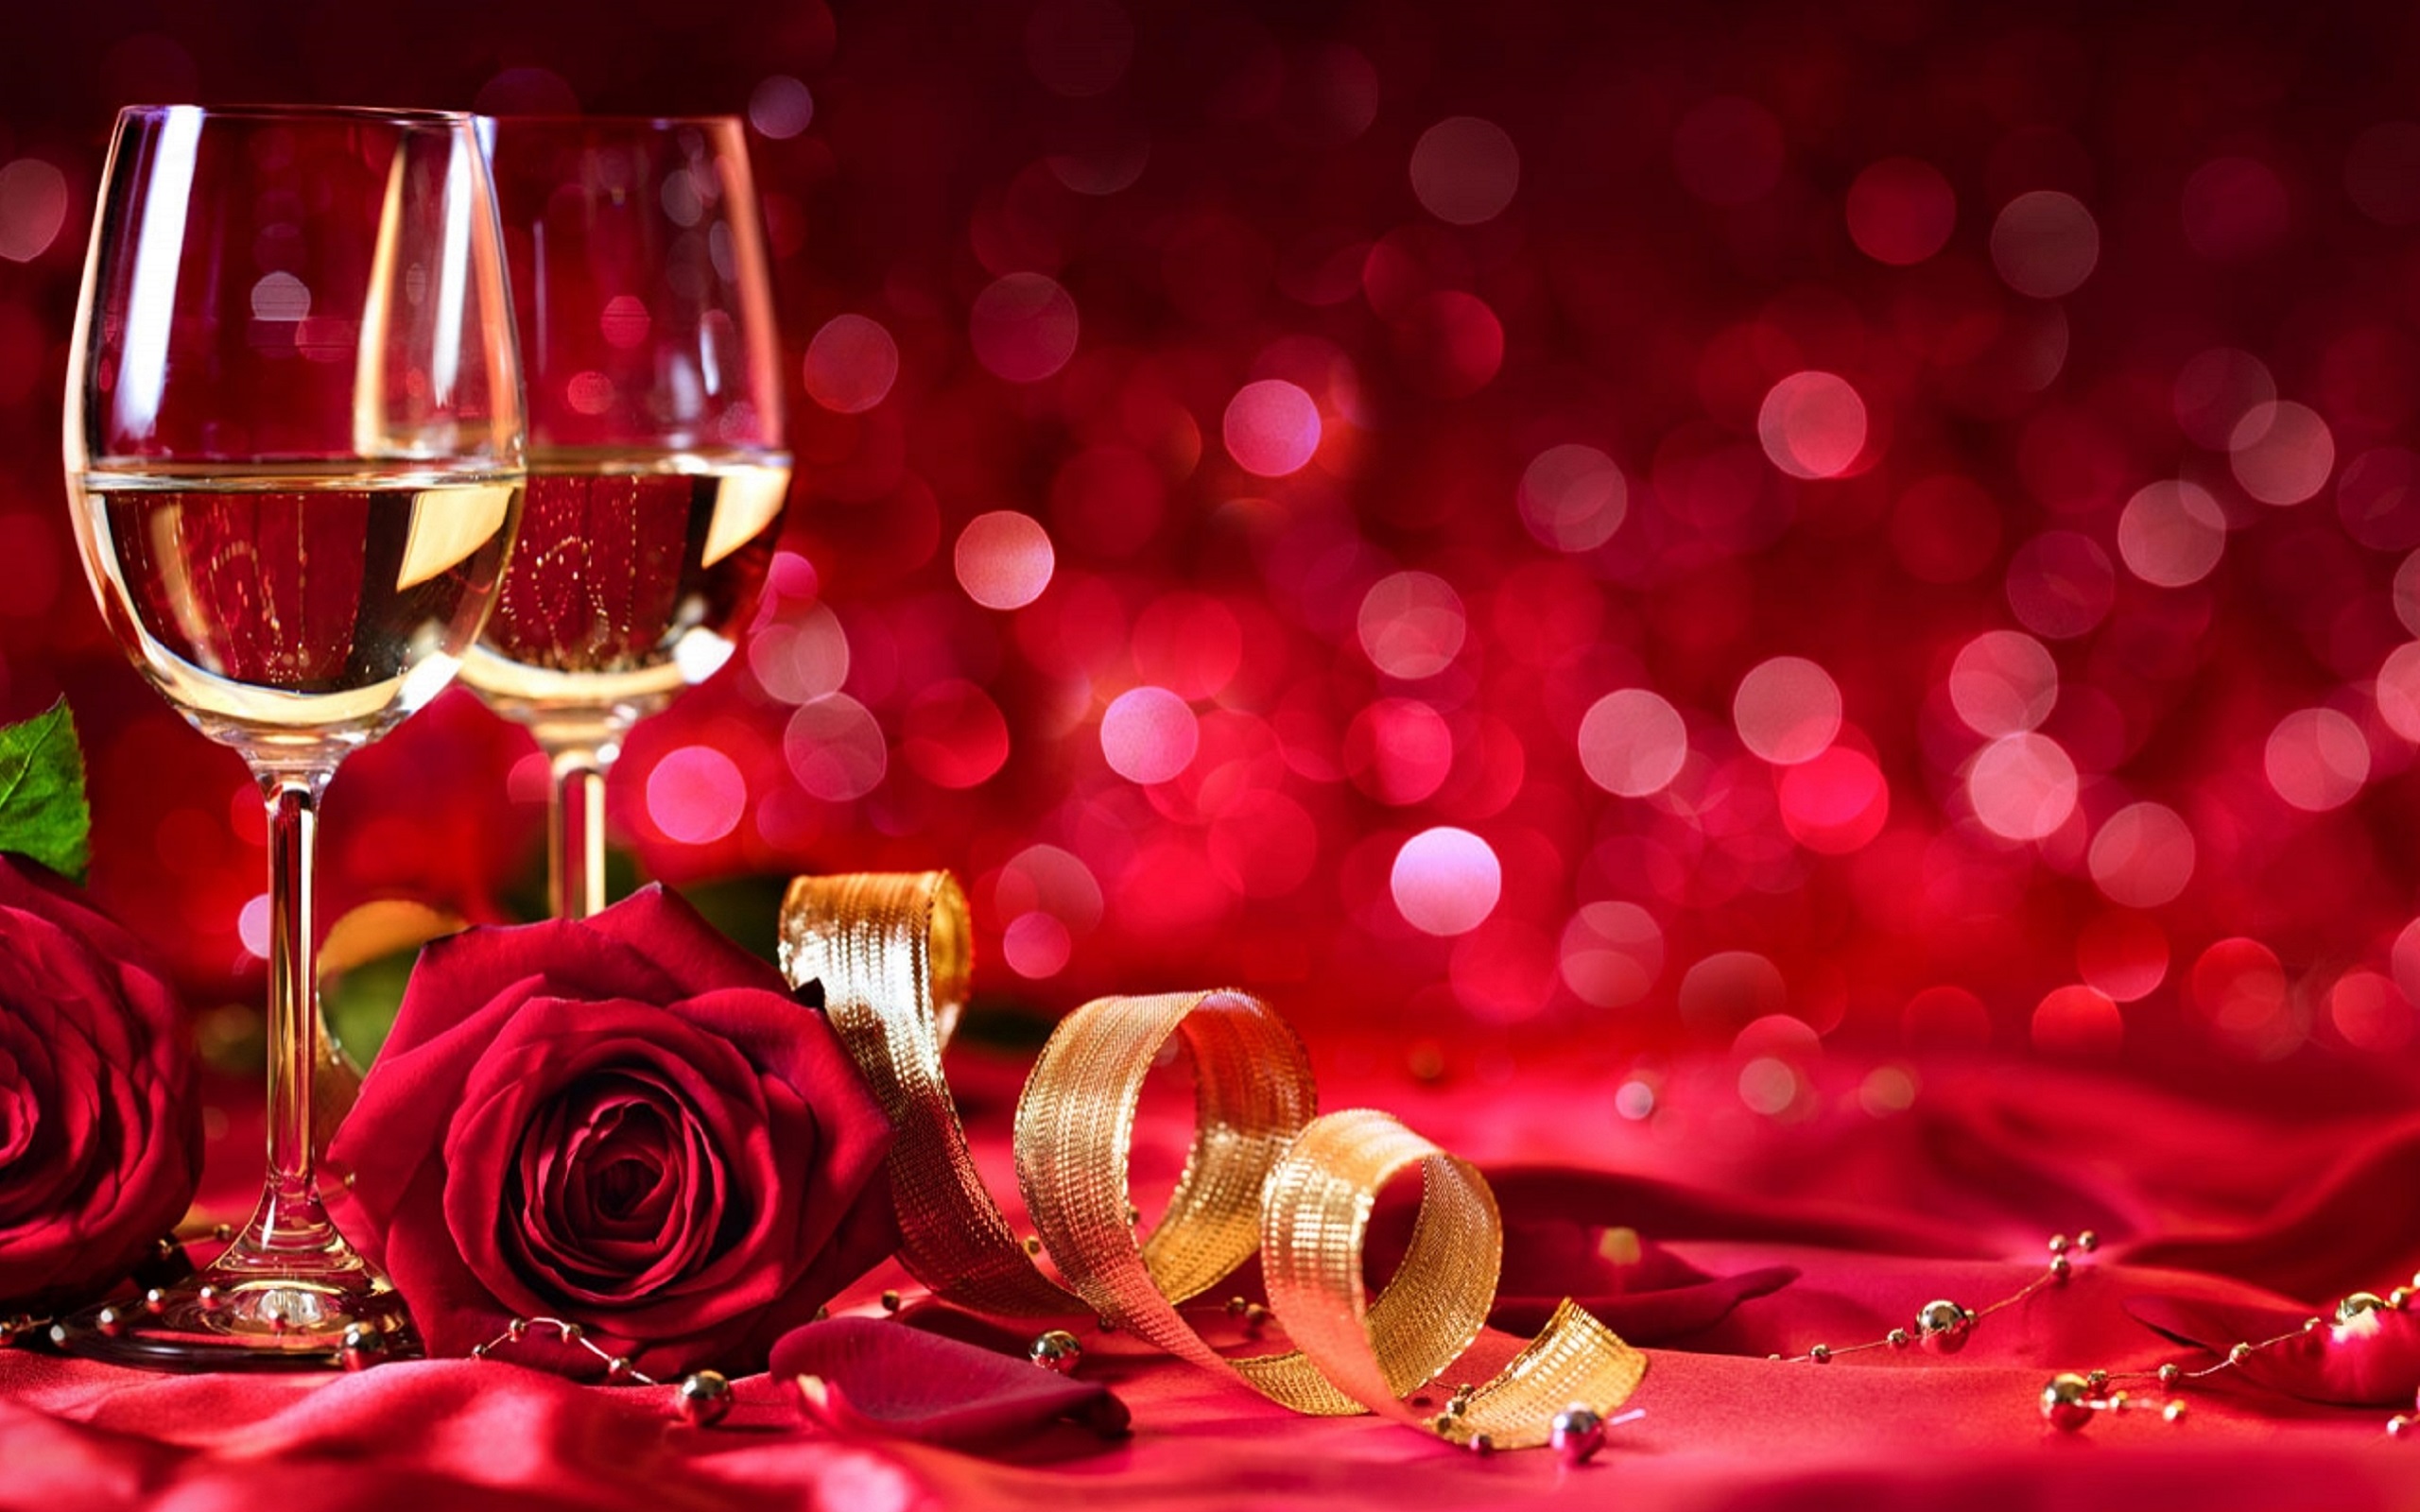 Valentines Love Wallpapers Icon Wallpaper Hd - Valentines Day Dinner Background - HD Wallpaper 